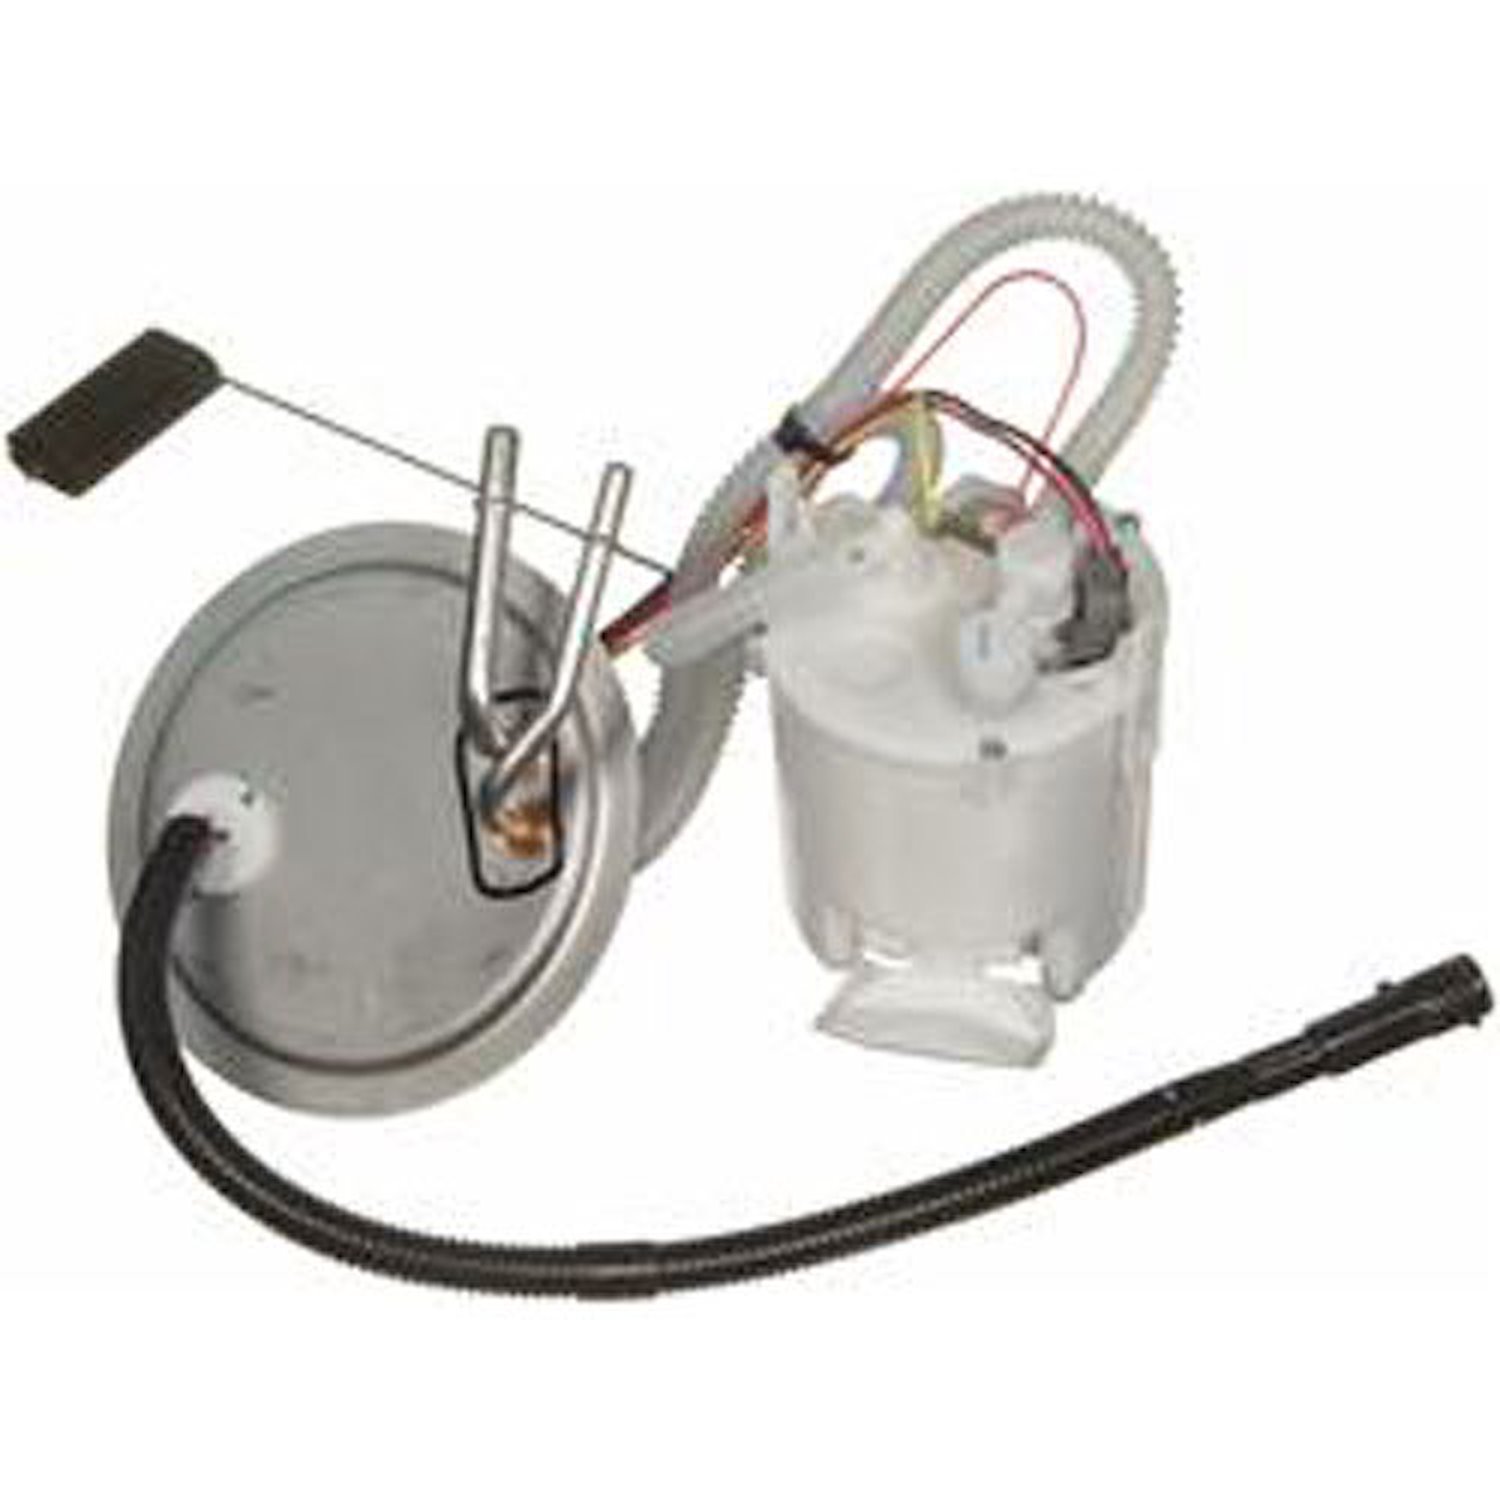 OE Ford Replacement Electric Fuel Pump Module Assembly 1999-04 Ford F250/F350 Super Duty 5.4L/6.8L V8